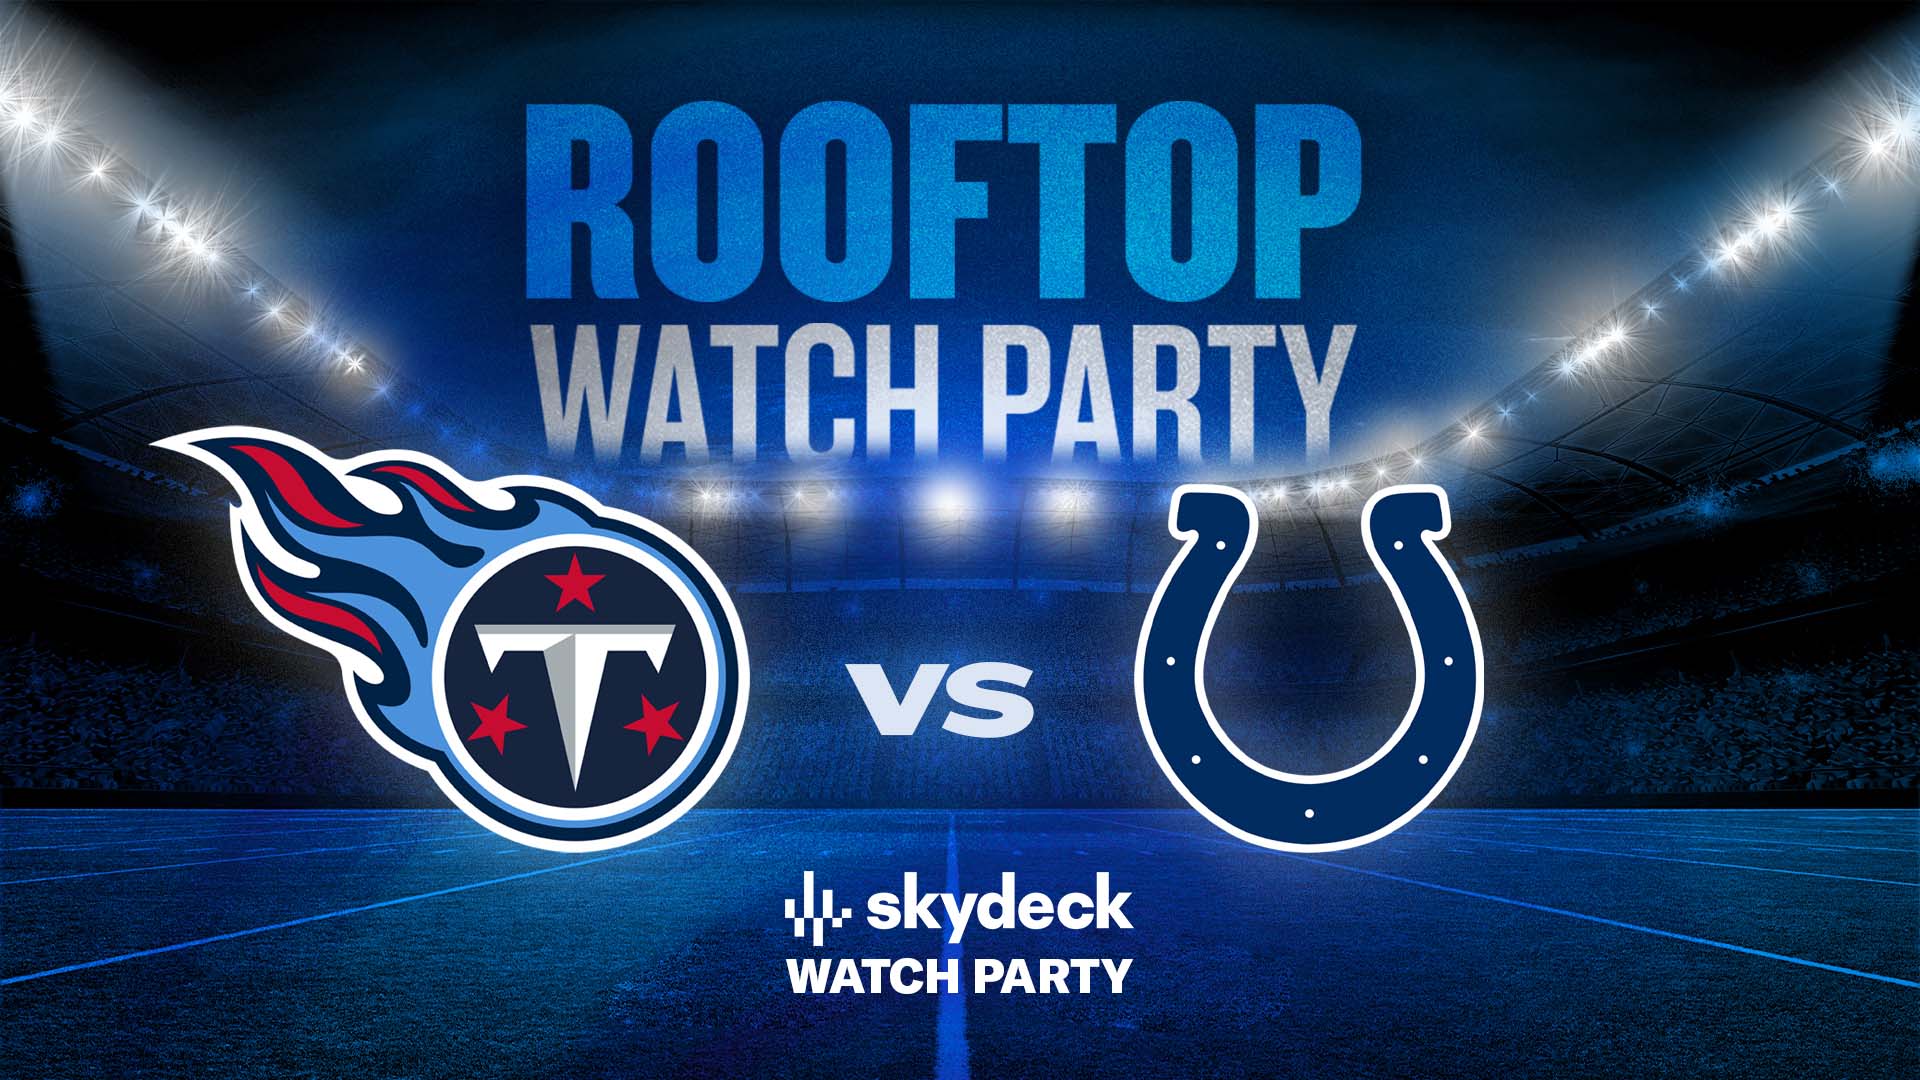 Promo image of Titans vs. Colts | Skydeck Watch Party